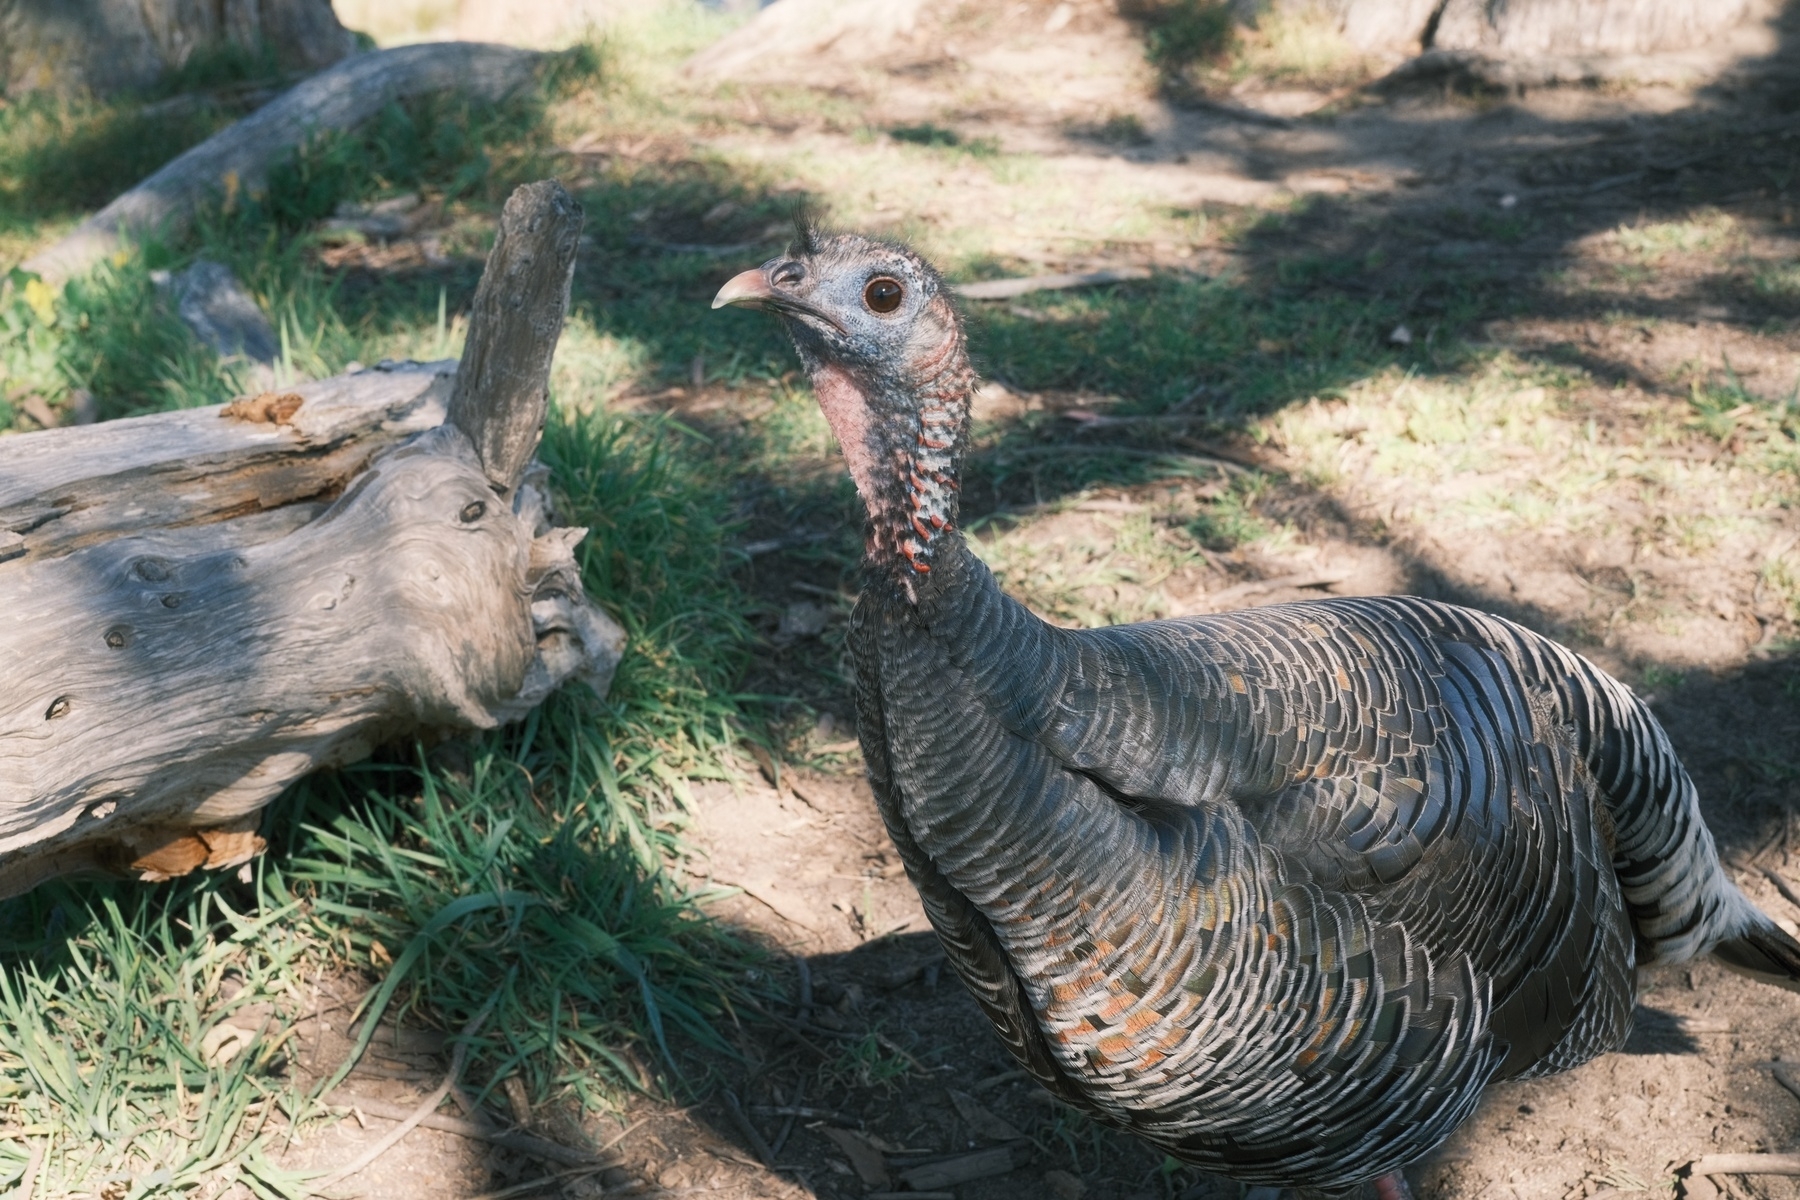 A turkey, showing its side, staring menacingly at the camera. The bird is about waist high and is standing next to a well-worn log. Its beak is bright and sharp.